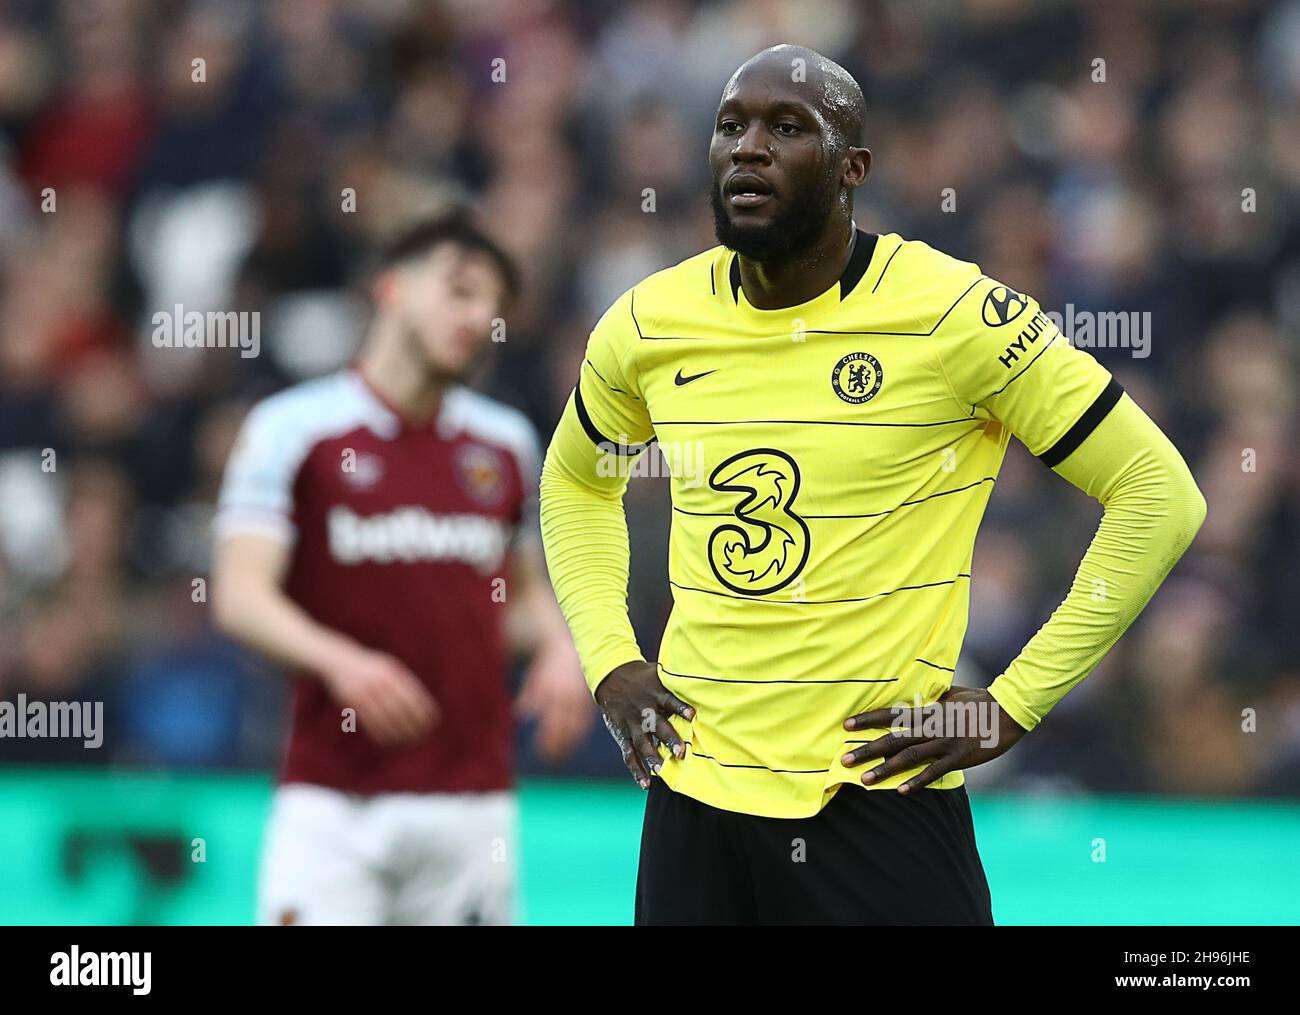 London, England, 4th December 2021. Romelu Lukaku of Chelsea during the Premier League match at the London Stadium, London. Picture credit should read: Paul Terry / Sportimage Stock Photo